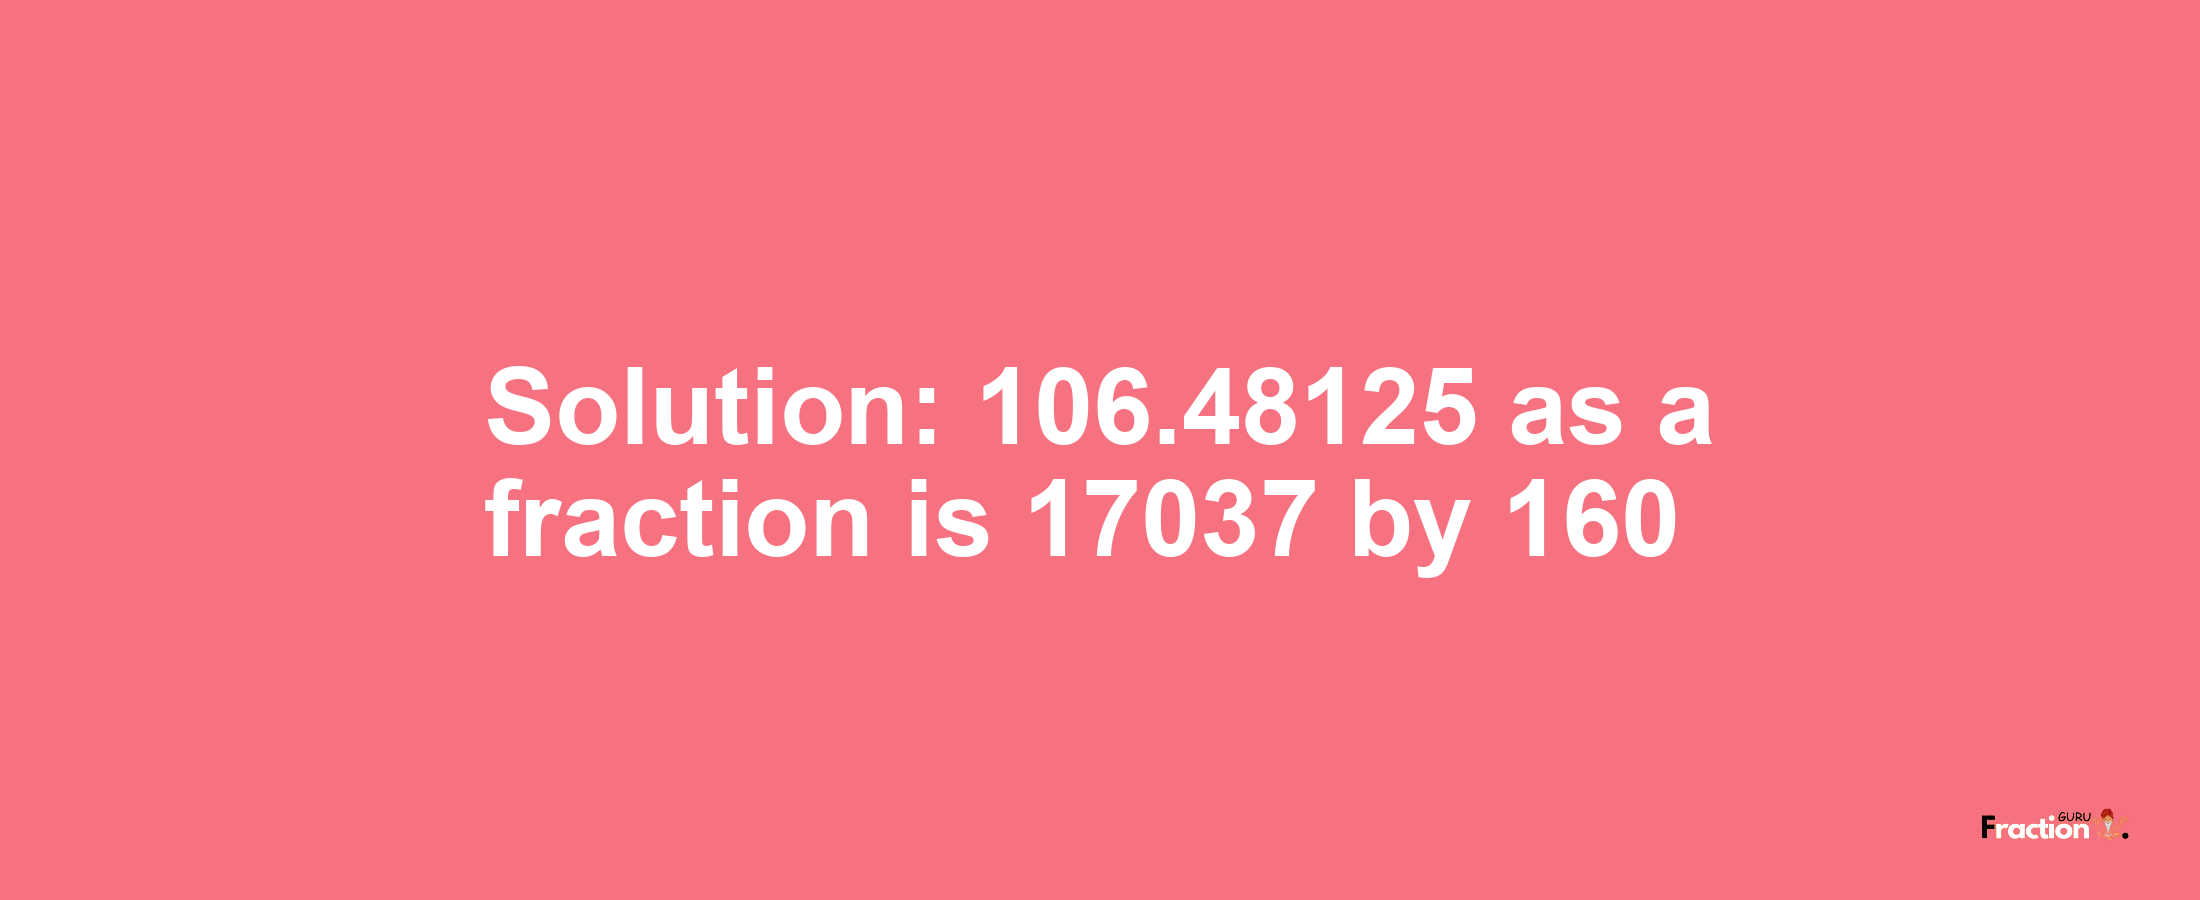 Solution:106.48125 as a fraction is 17037/160